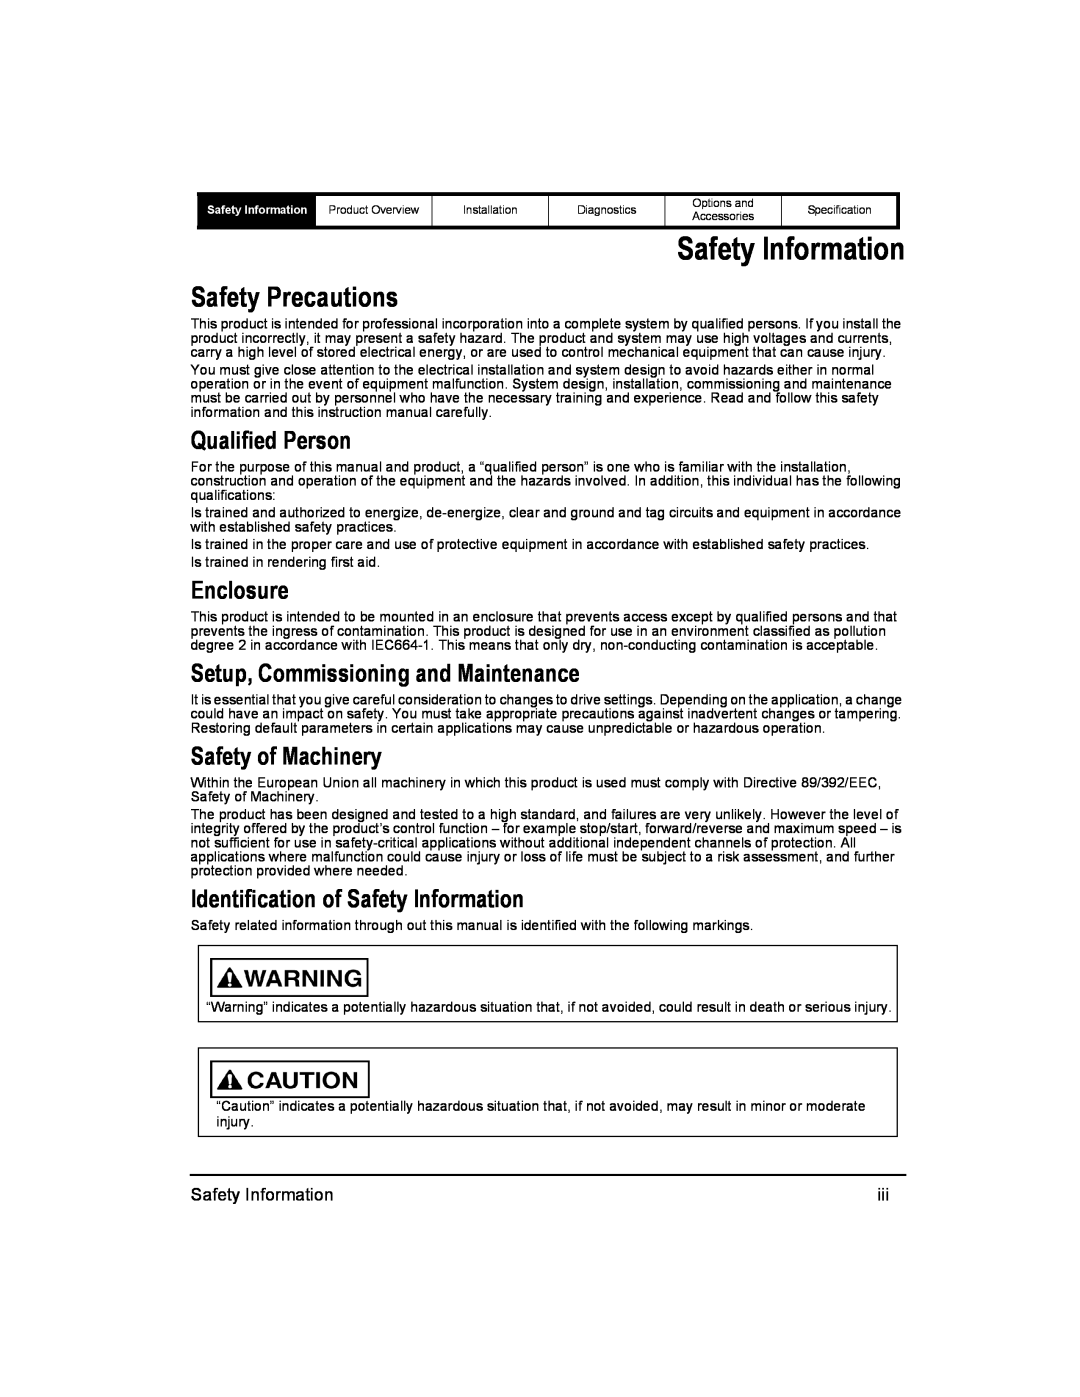 Emerson 400518-01 Safety Information, Safety Precautions, Qualified Person, Enclosure, Safety of Machinery 